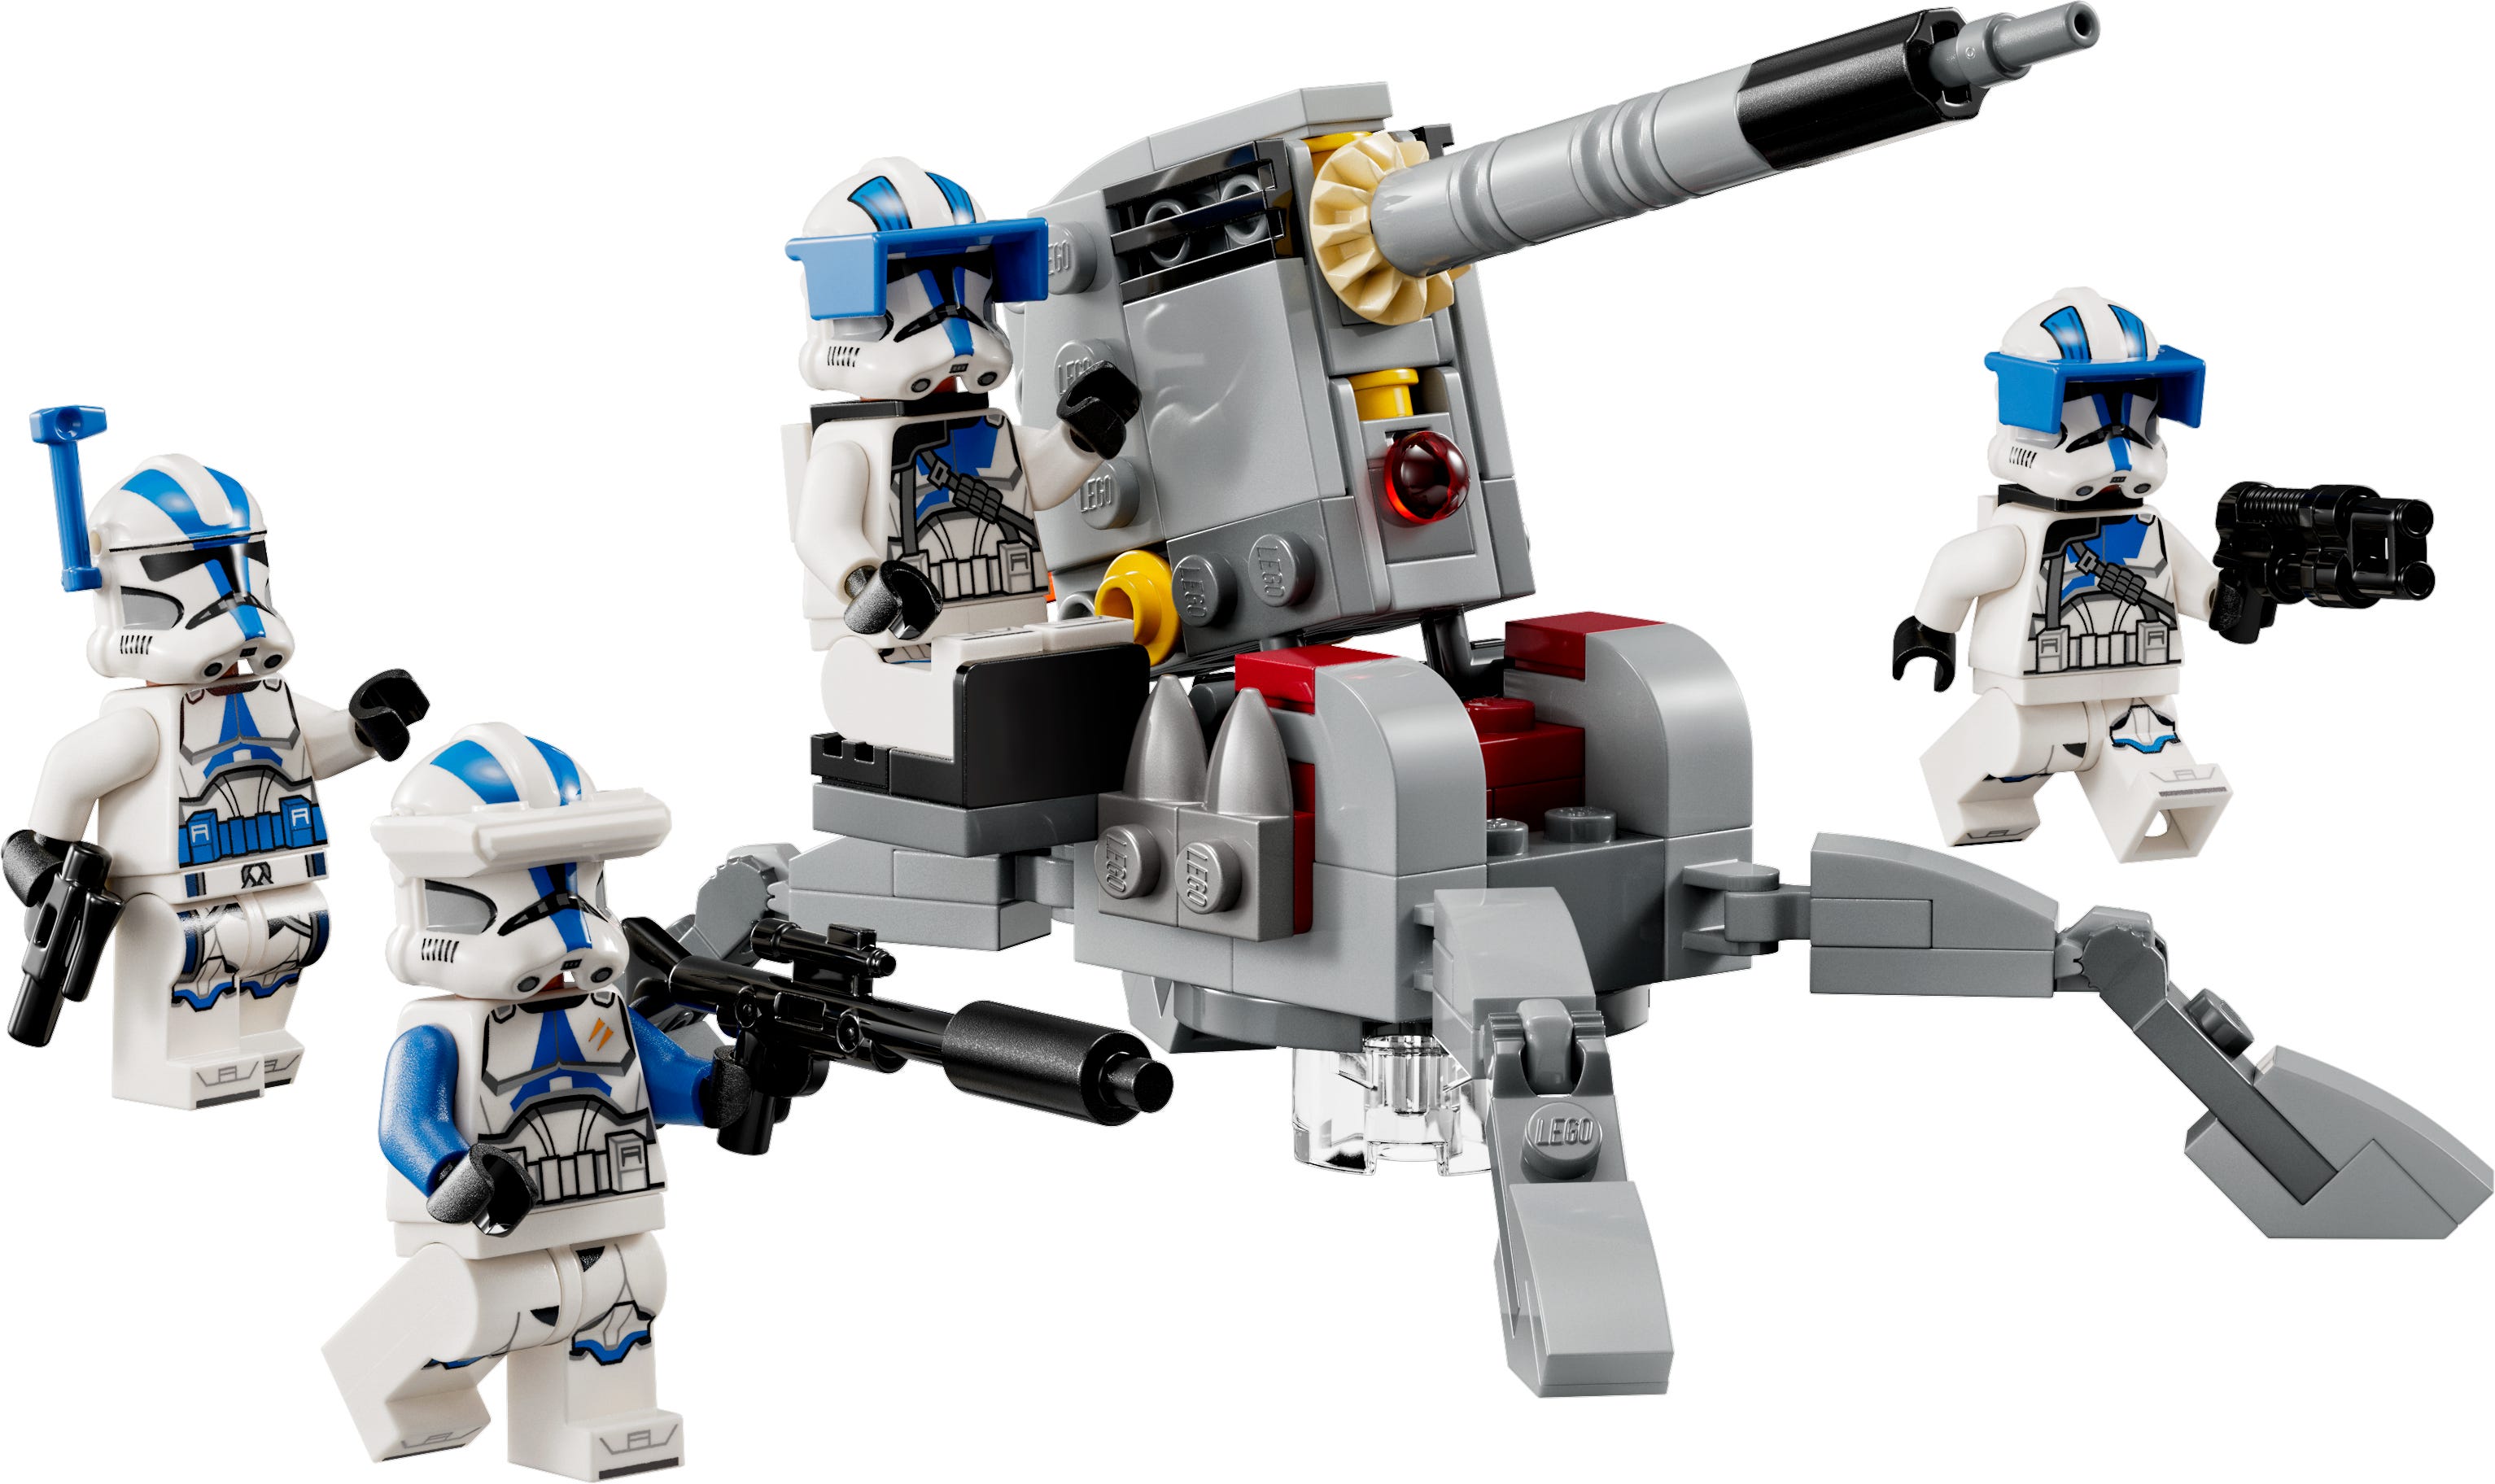 501st Clone Troopers™ Battle Pack